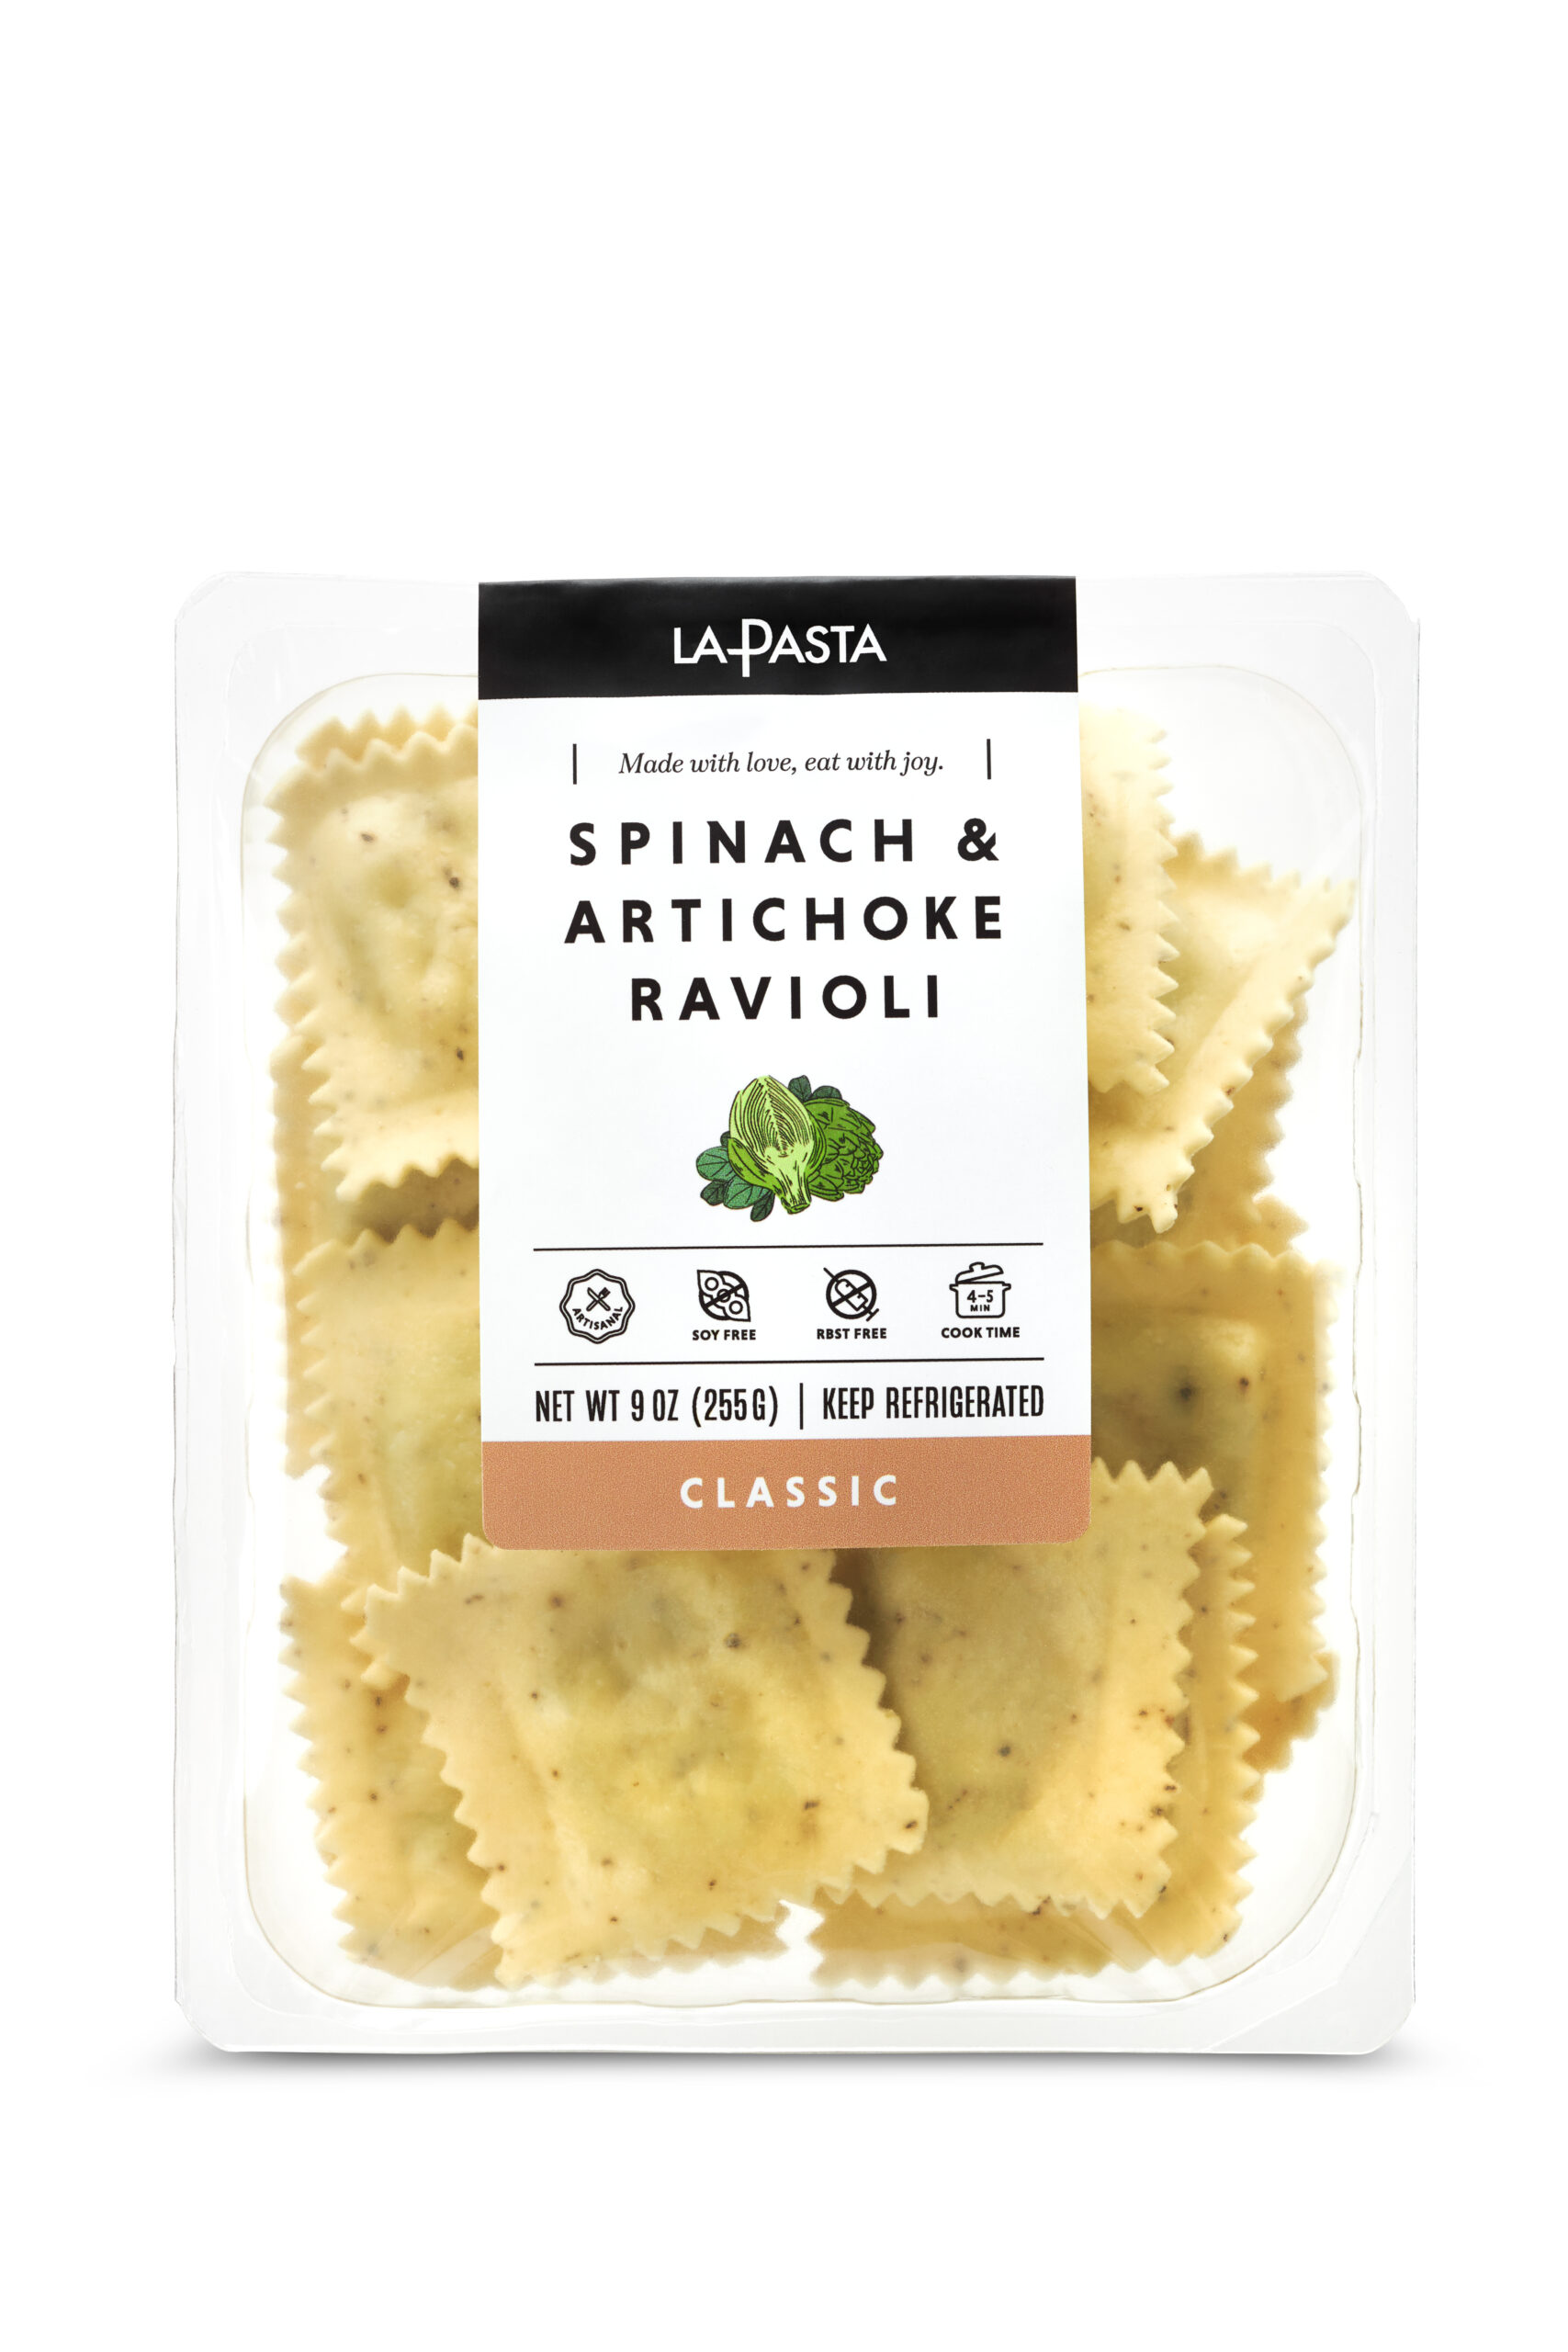 A package of spinach and artichoke ravioli.